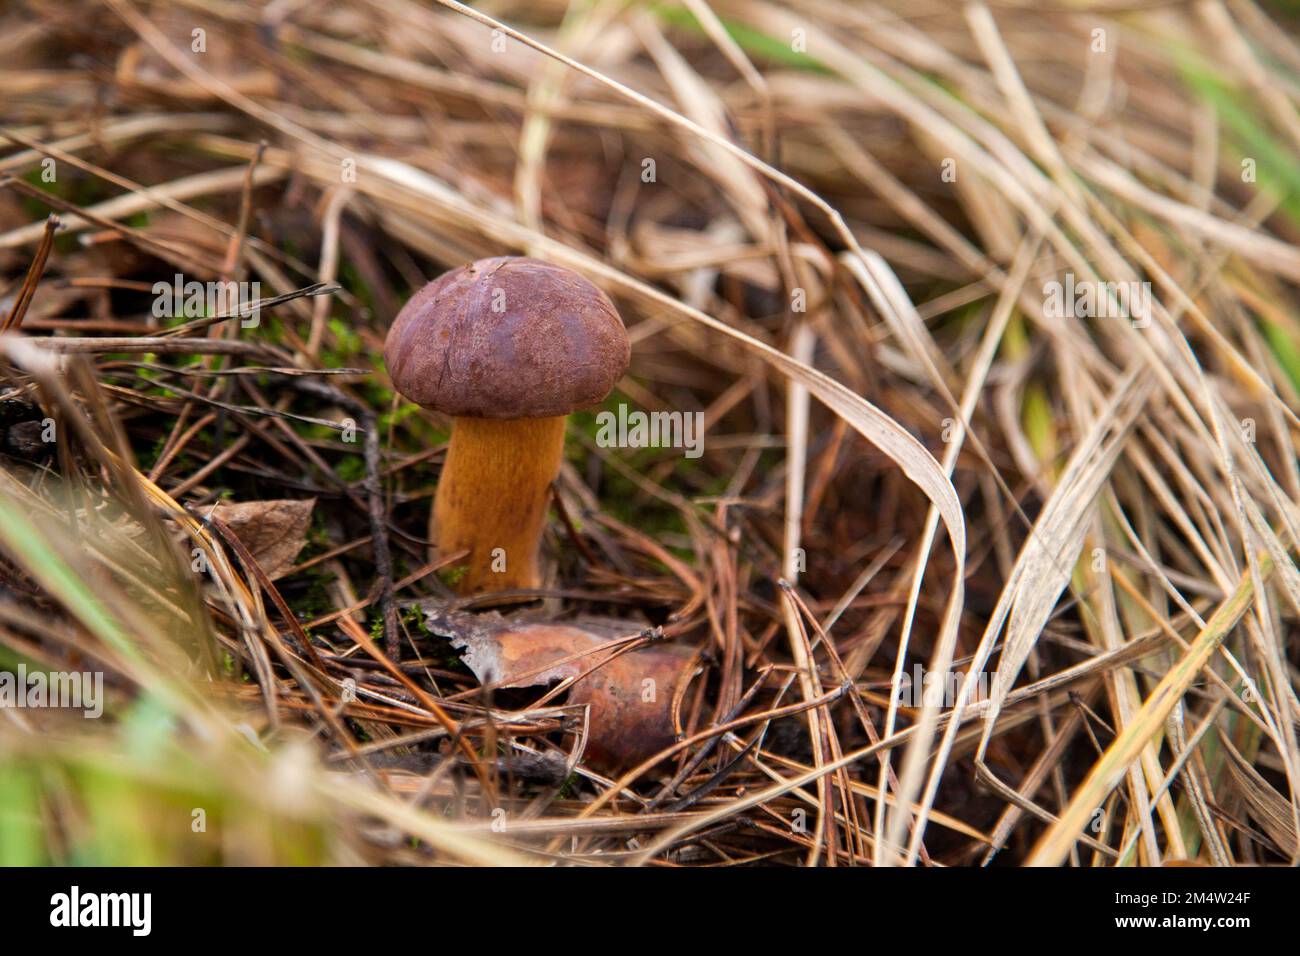 Close up view of boletus badius, imleria badia or bay bolete growing on the forest floor among moss and dry fallen leaves at autumn season. Edible and Stock Photo